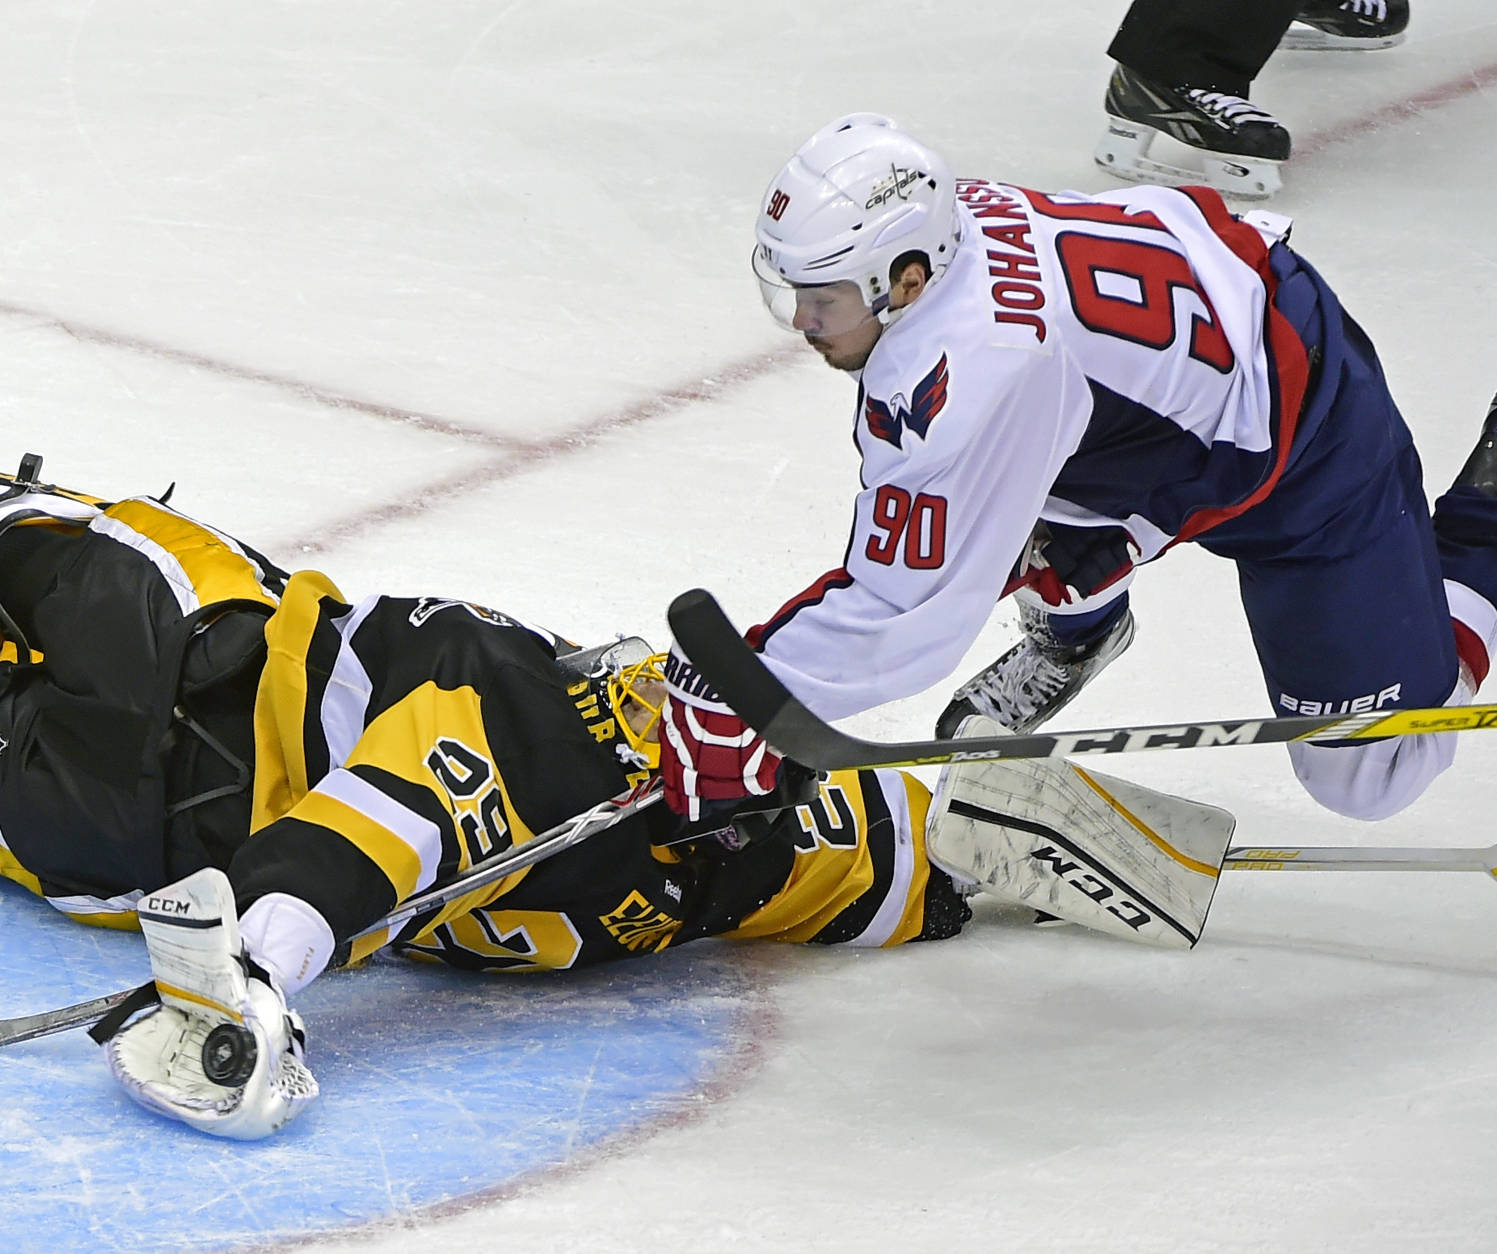 Pittsburgh Penguins goalie Marc-Andre Fleury (29) makes a save against Washington Capitals left wing Marcus Johansson (90), of Sweden,  during the third period of an NHL hockey game Thursday, Oct. 13, 2016, in Pittsburgh, Pa. (AP Photo/Fred Vuich)